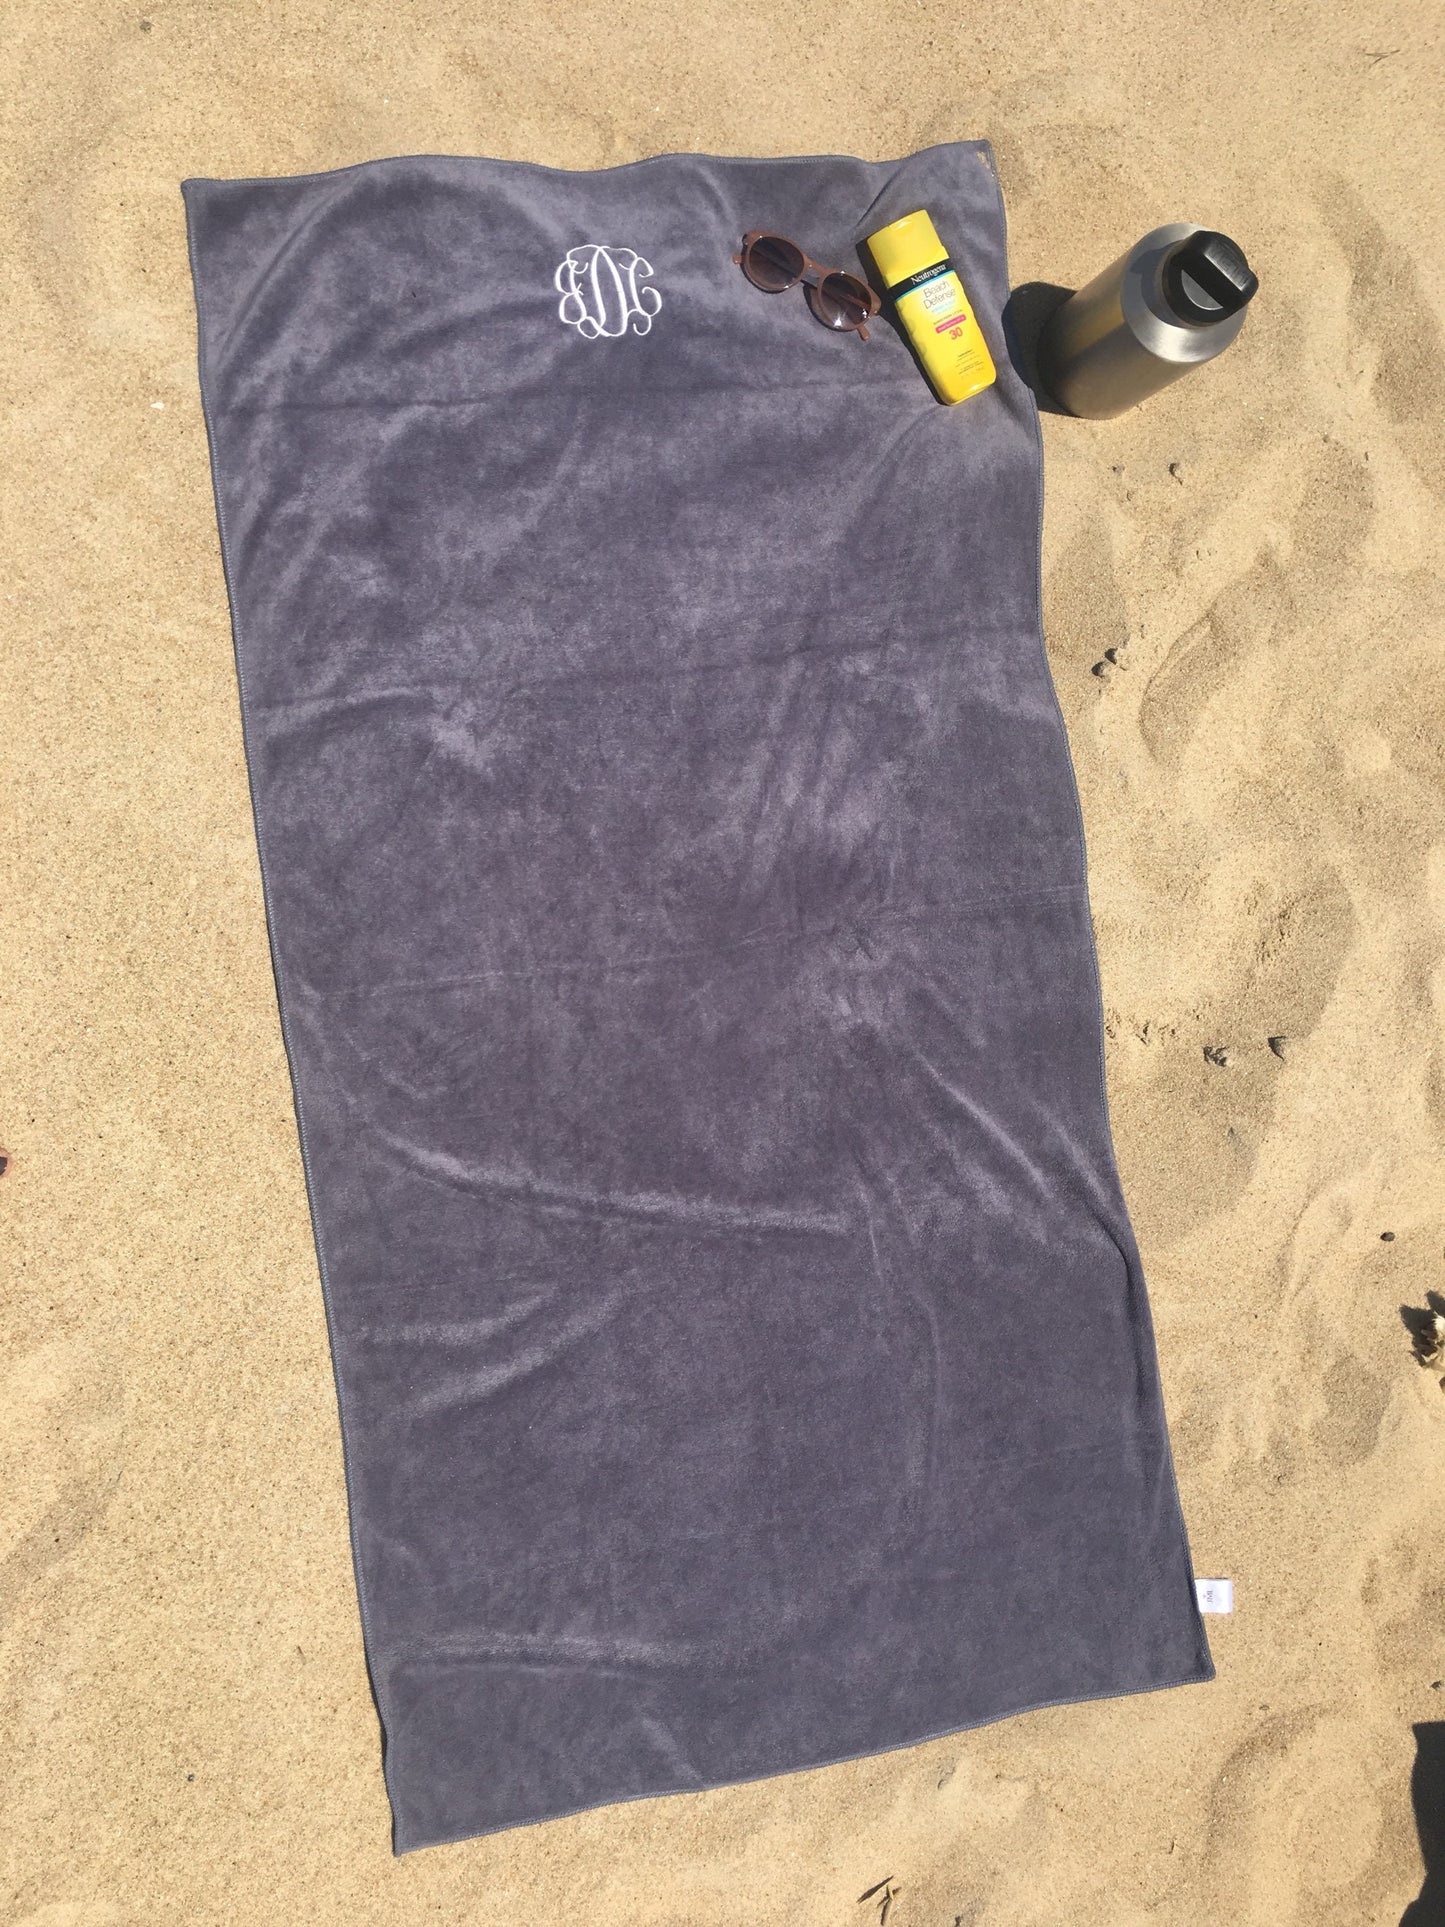 Personalized Microfiber Towel with Monogram - Use for Pool, beach, yoga etc.!